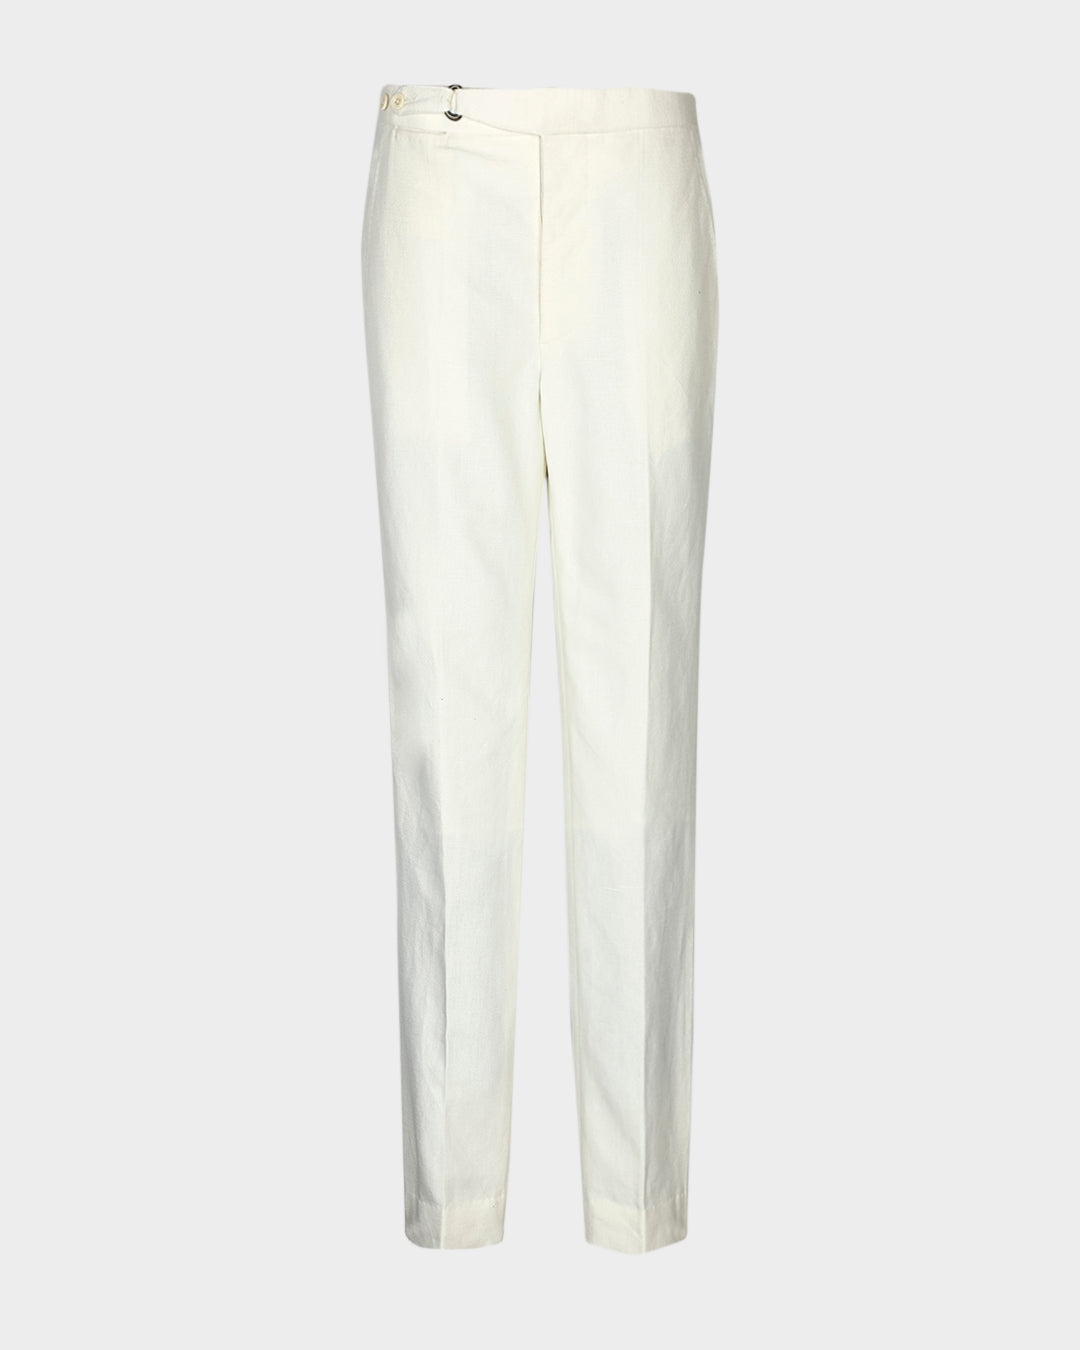 Front view of custom linen canvas pants for men by Luxire in white